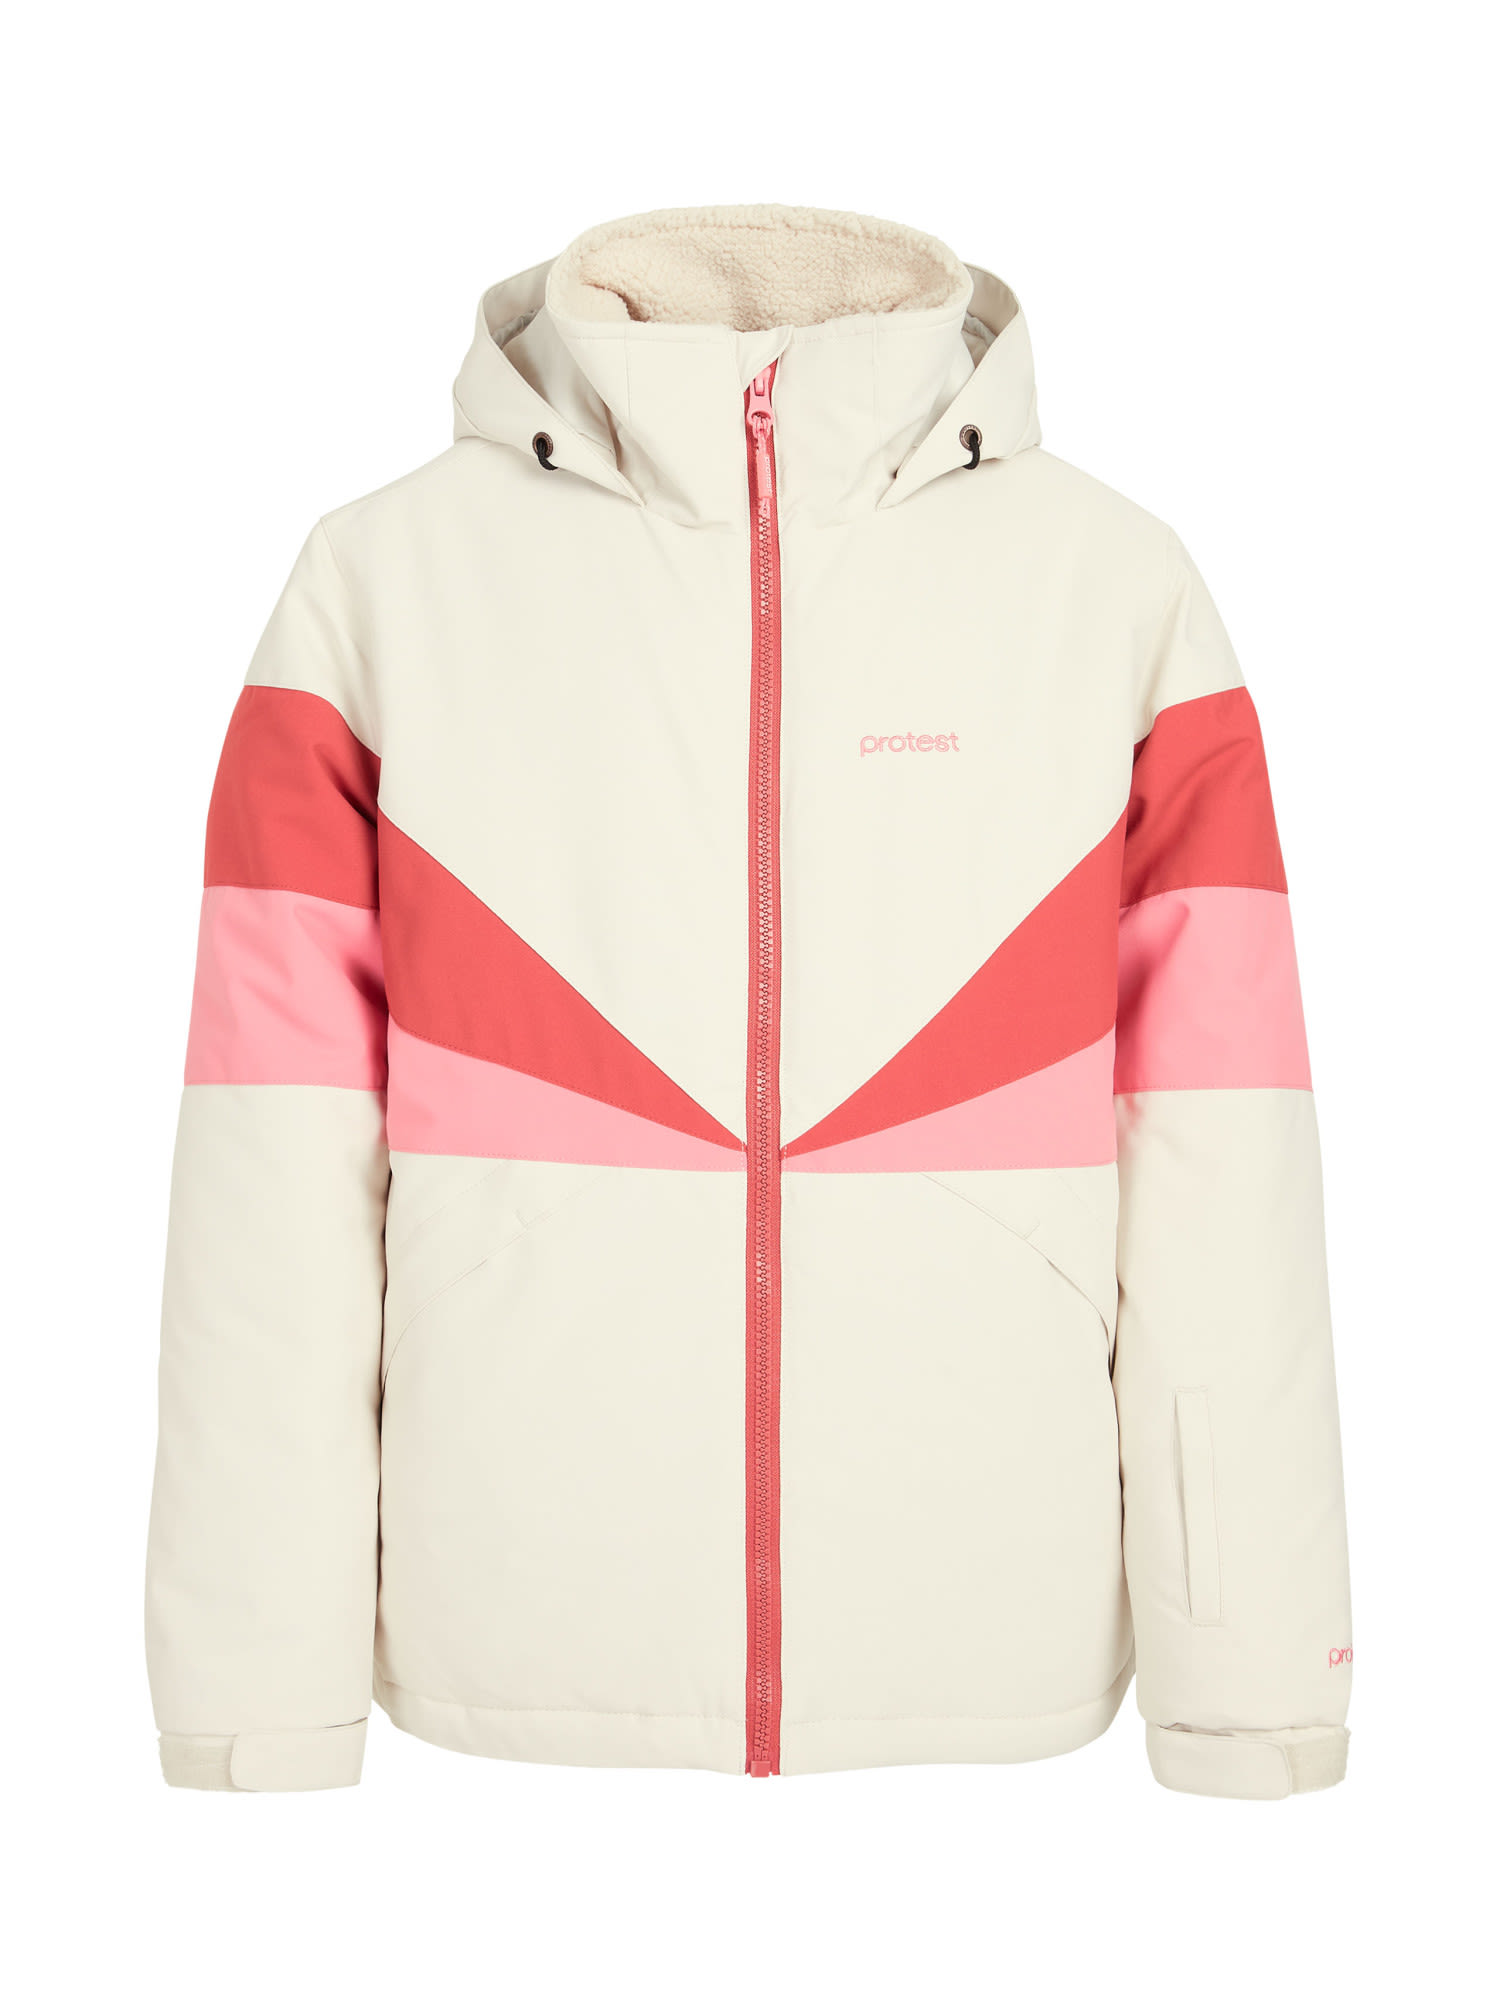 Protest Girls Prtkate JR Snowjacket Colorblock - Beige - Weiss- Female Anoraks- Grsse 128 - Farbe Kitoffwhite unter Protest